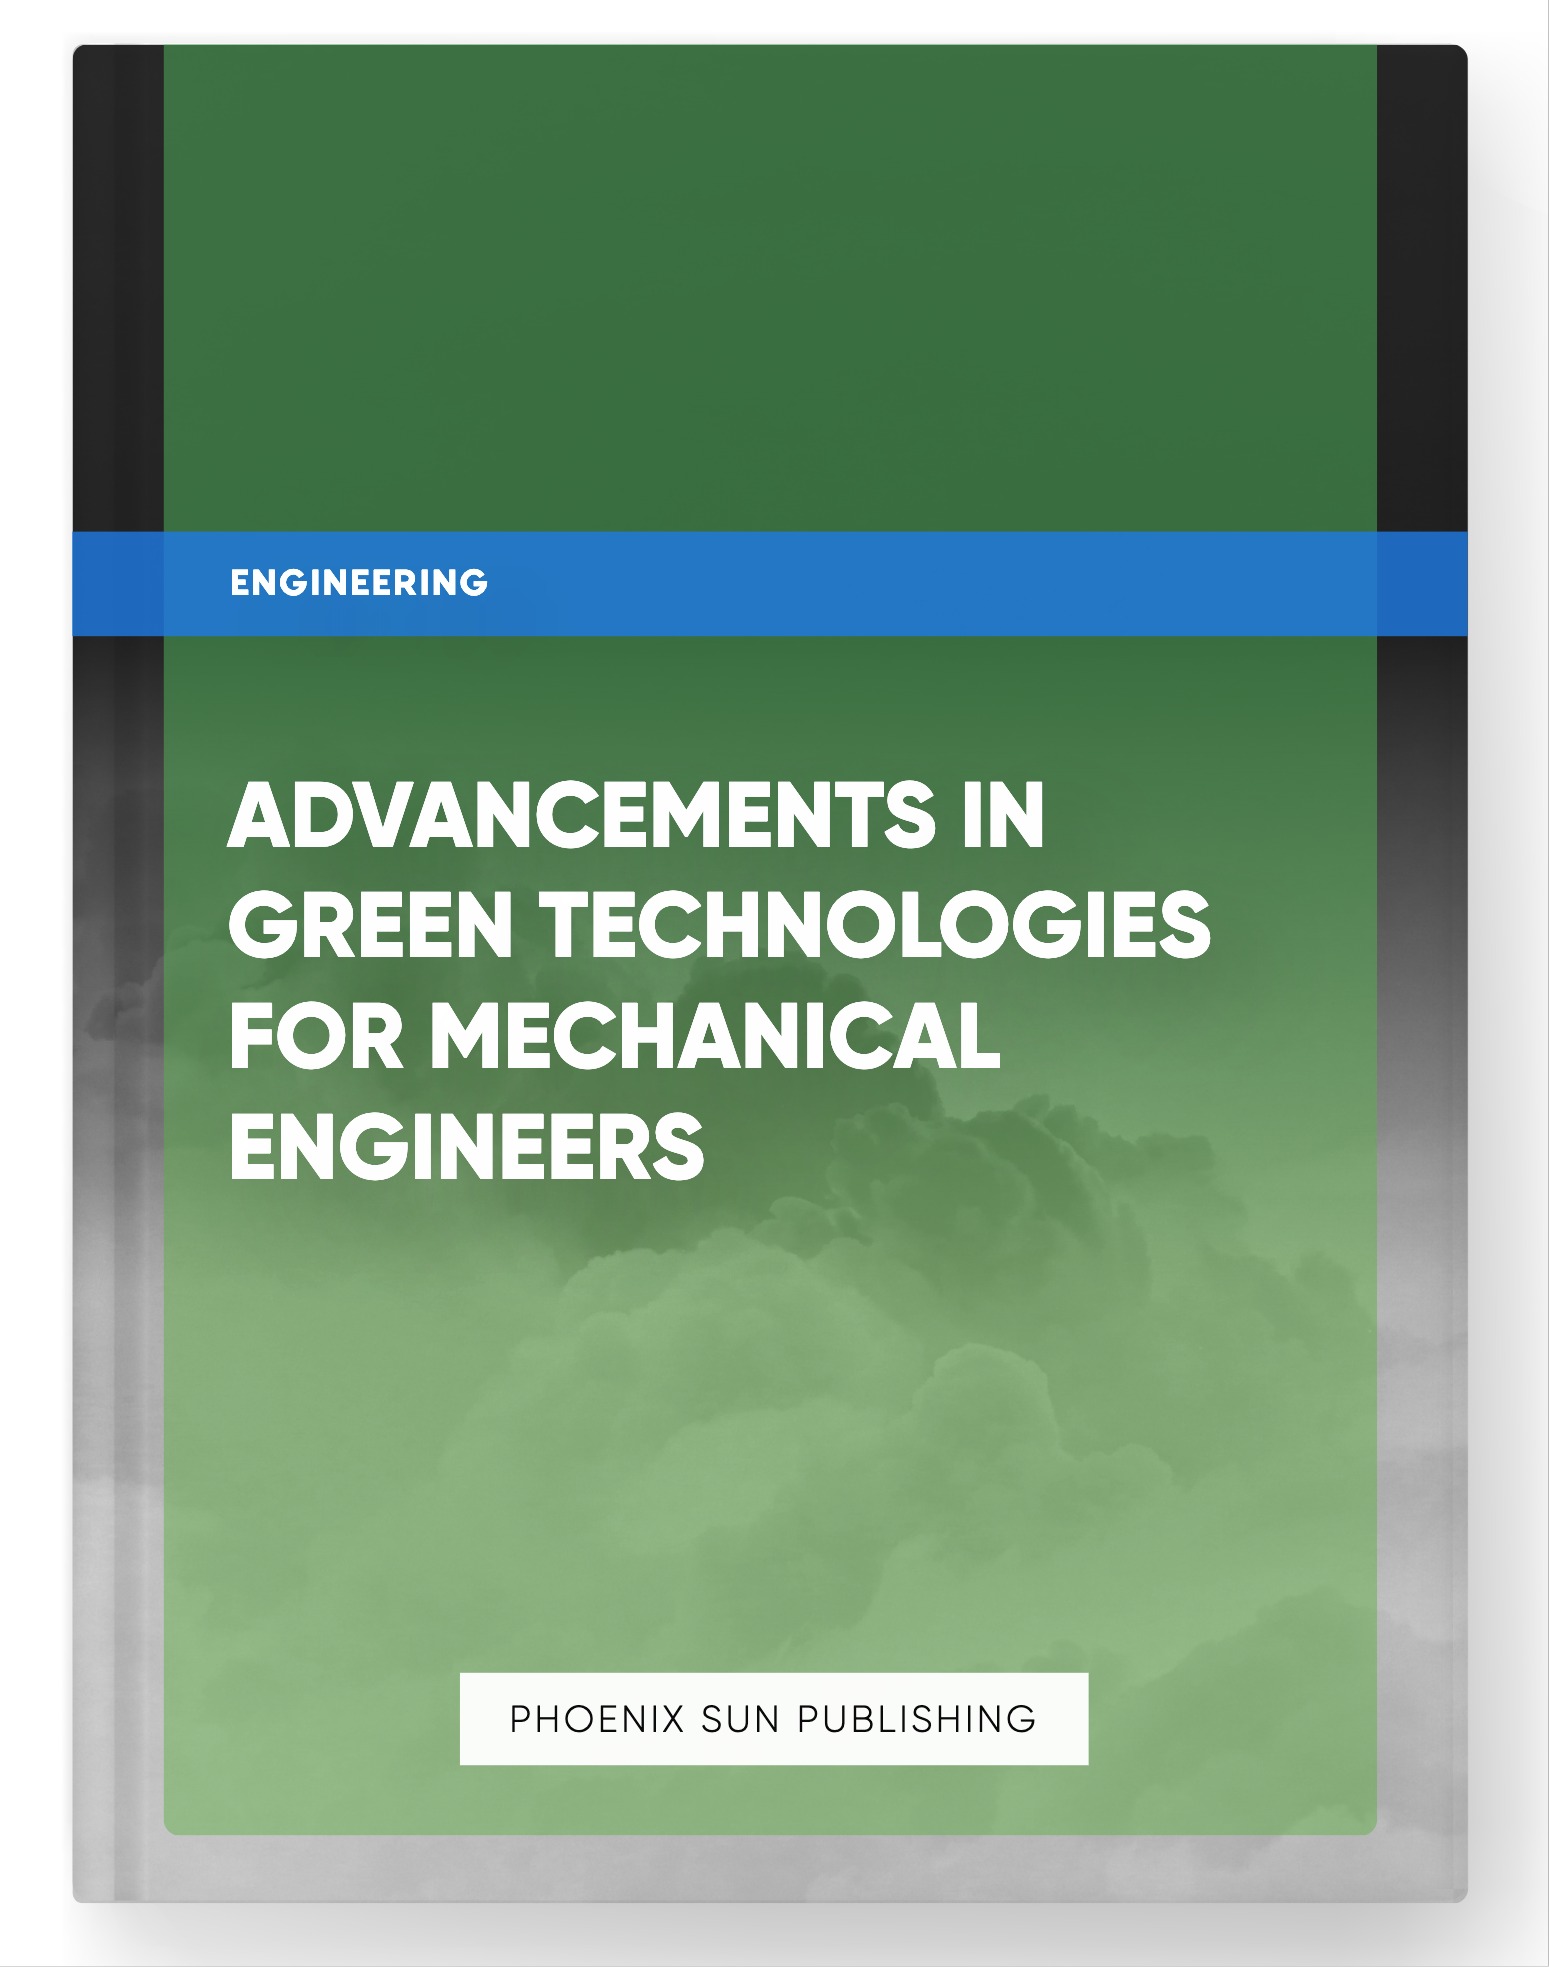 Advancements in Green Technologies for Mechanical Engineers